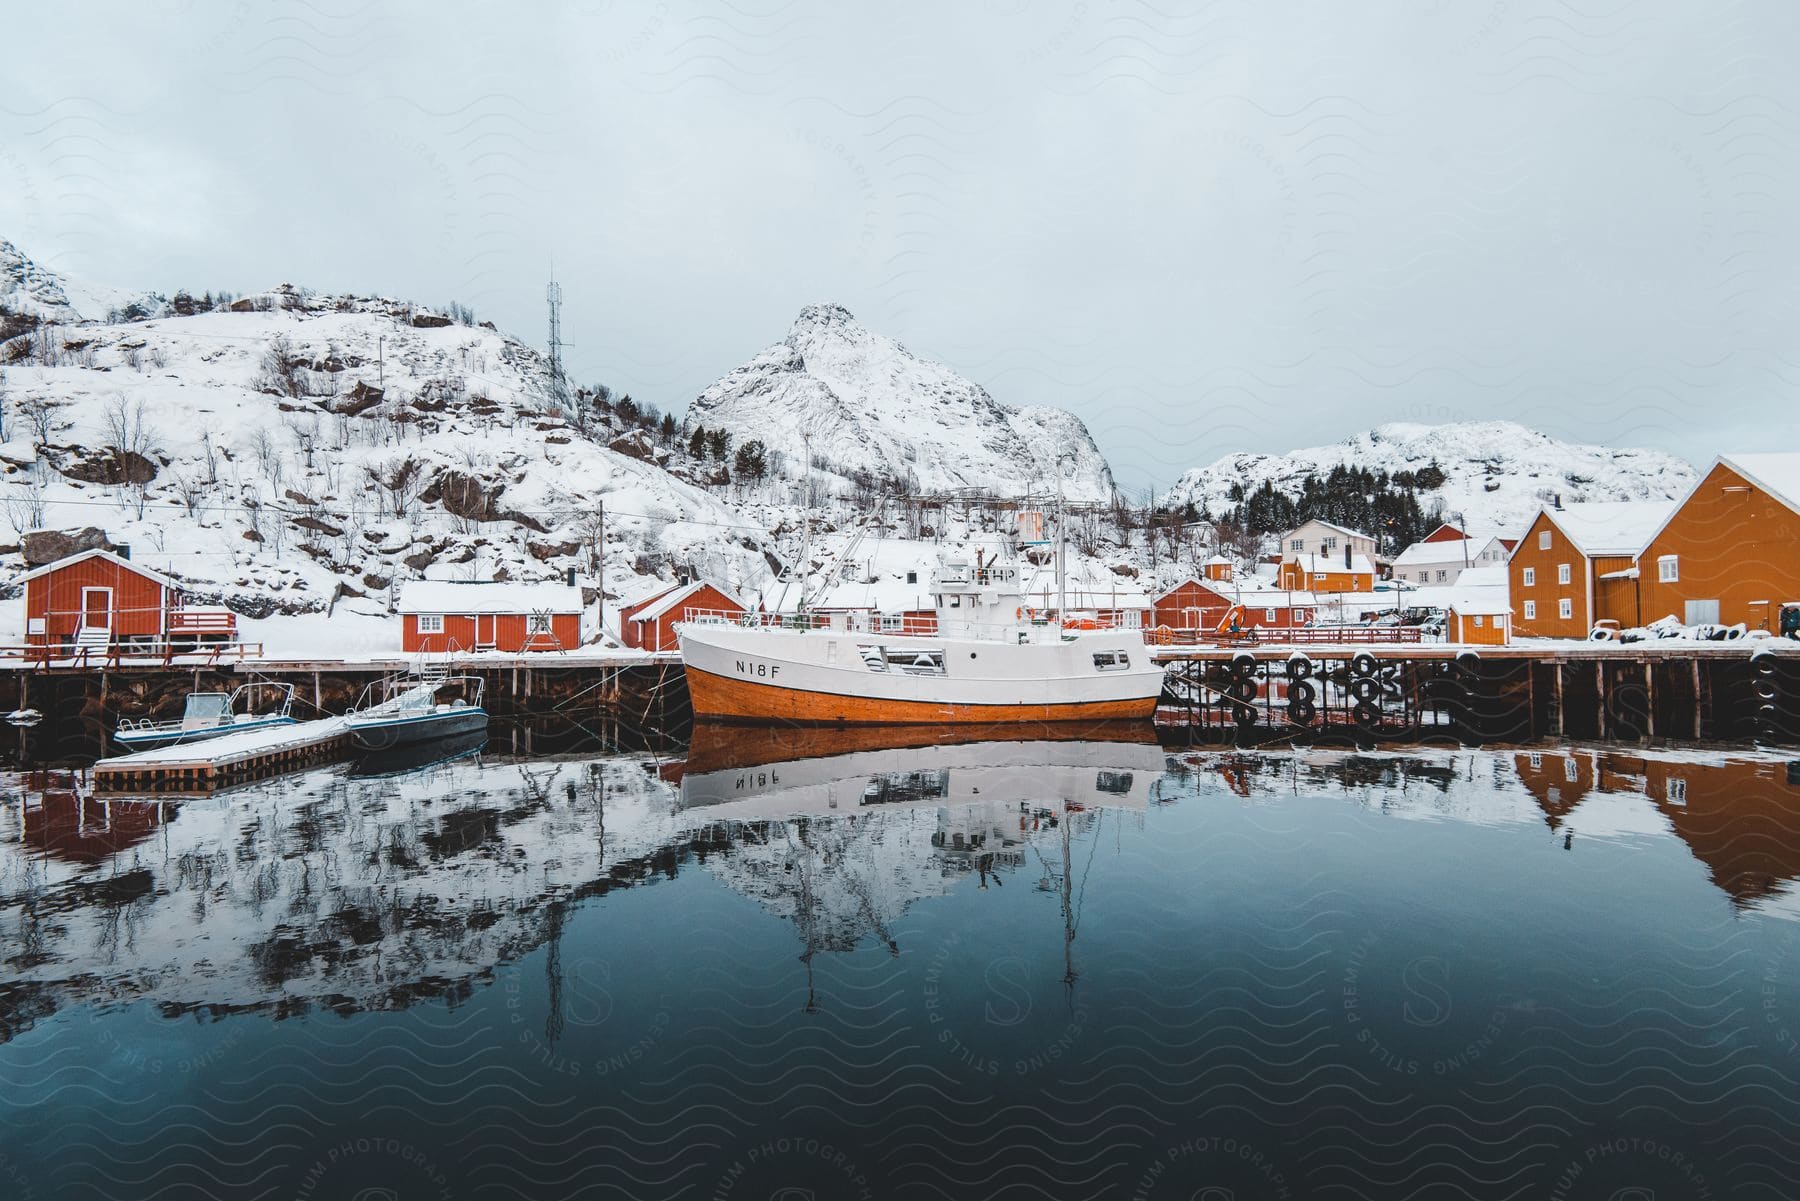 A fishing boat docked at a pier in an arctic coastal town